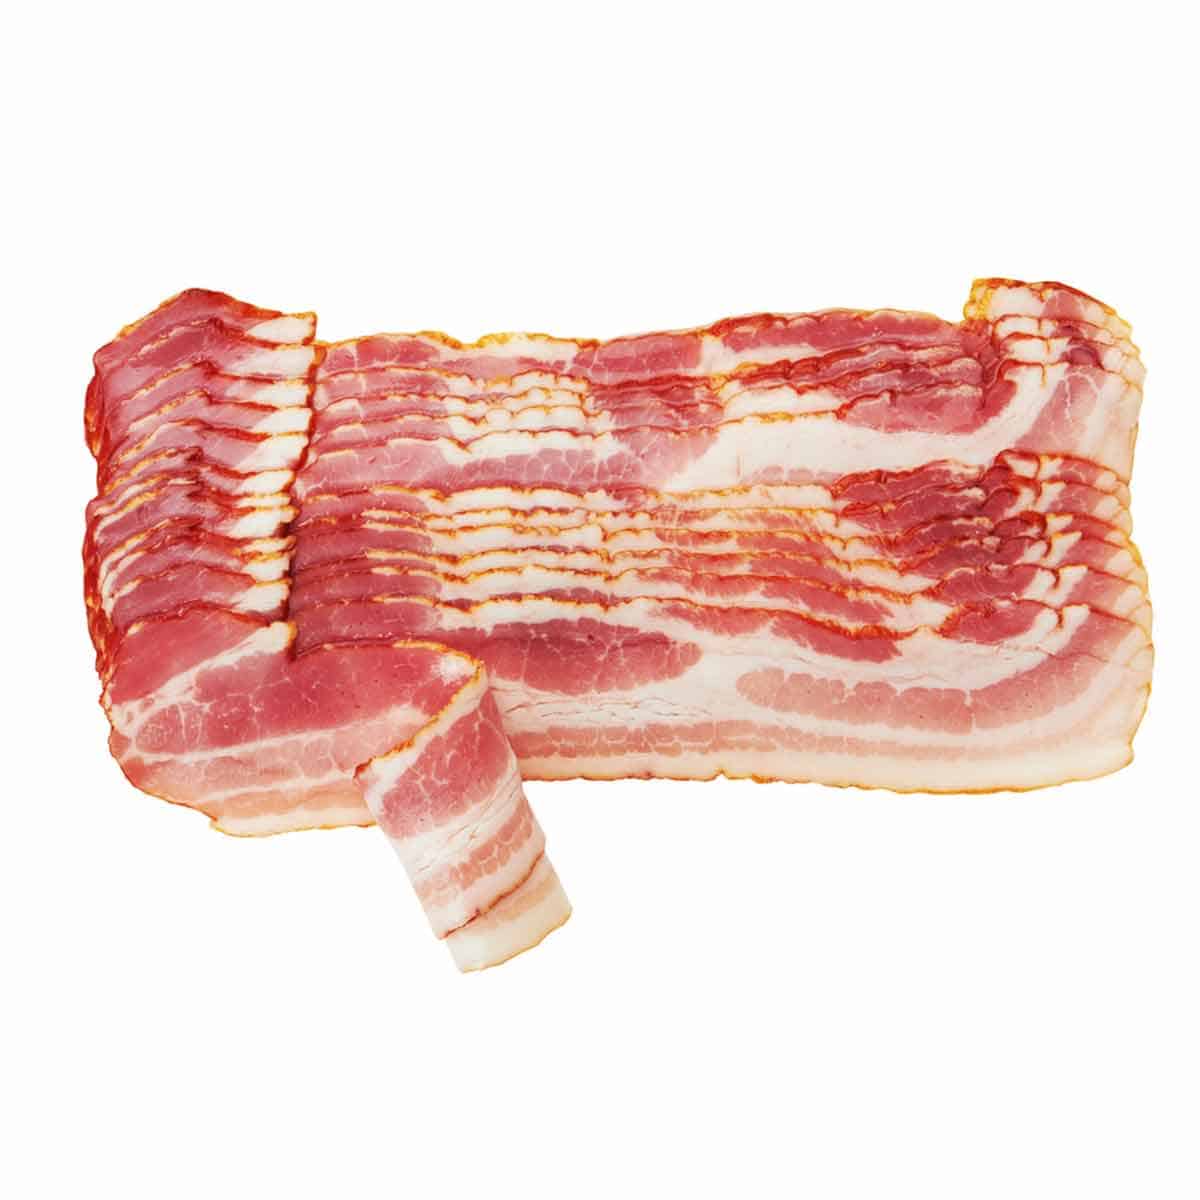 A pound of uncooked bacon strips.